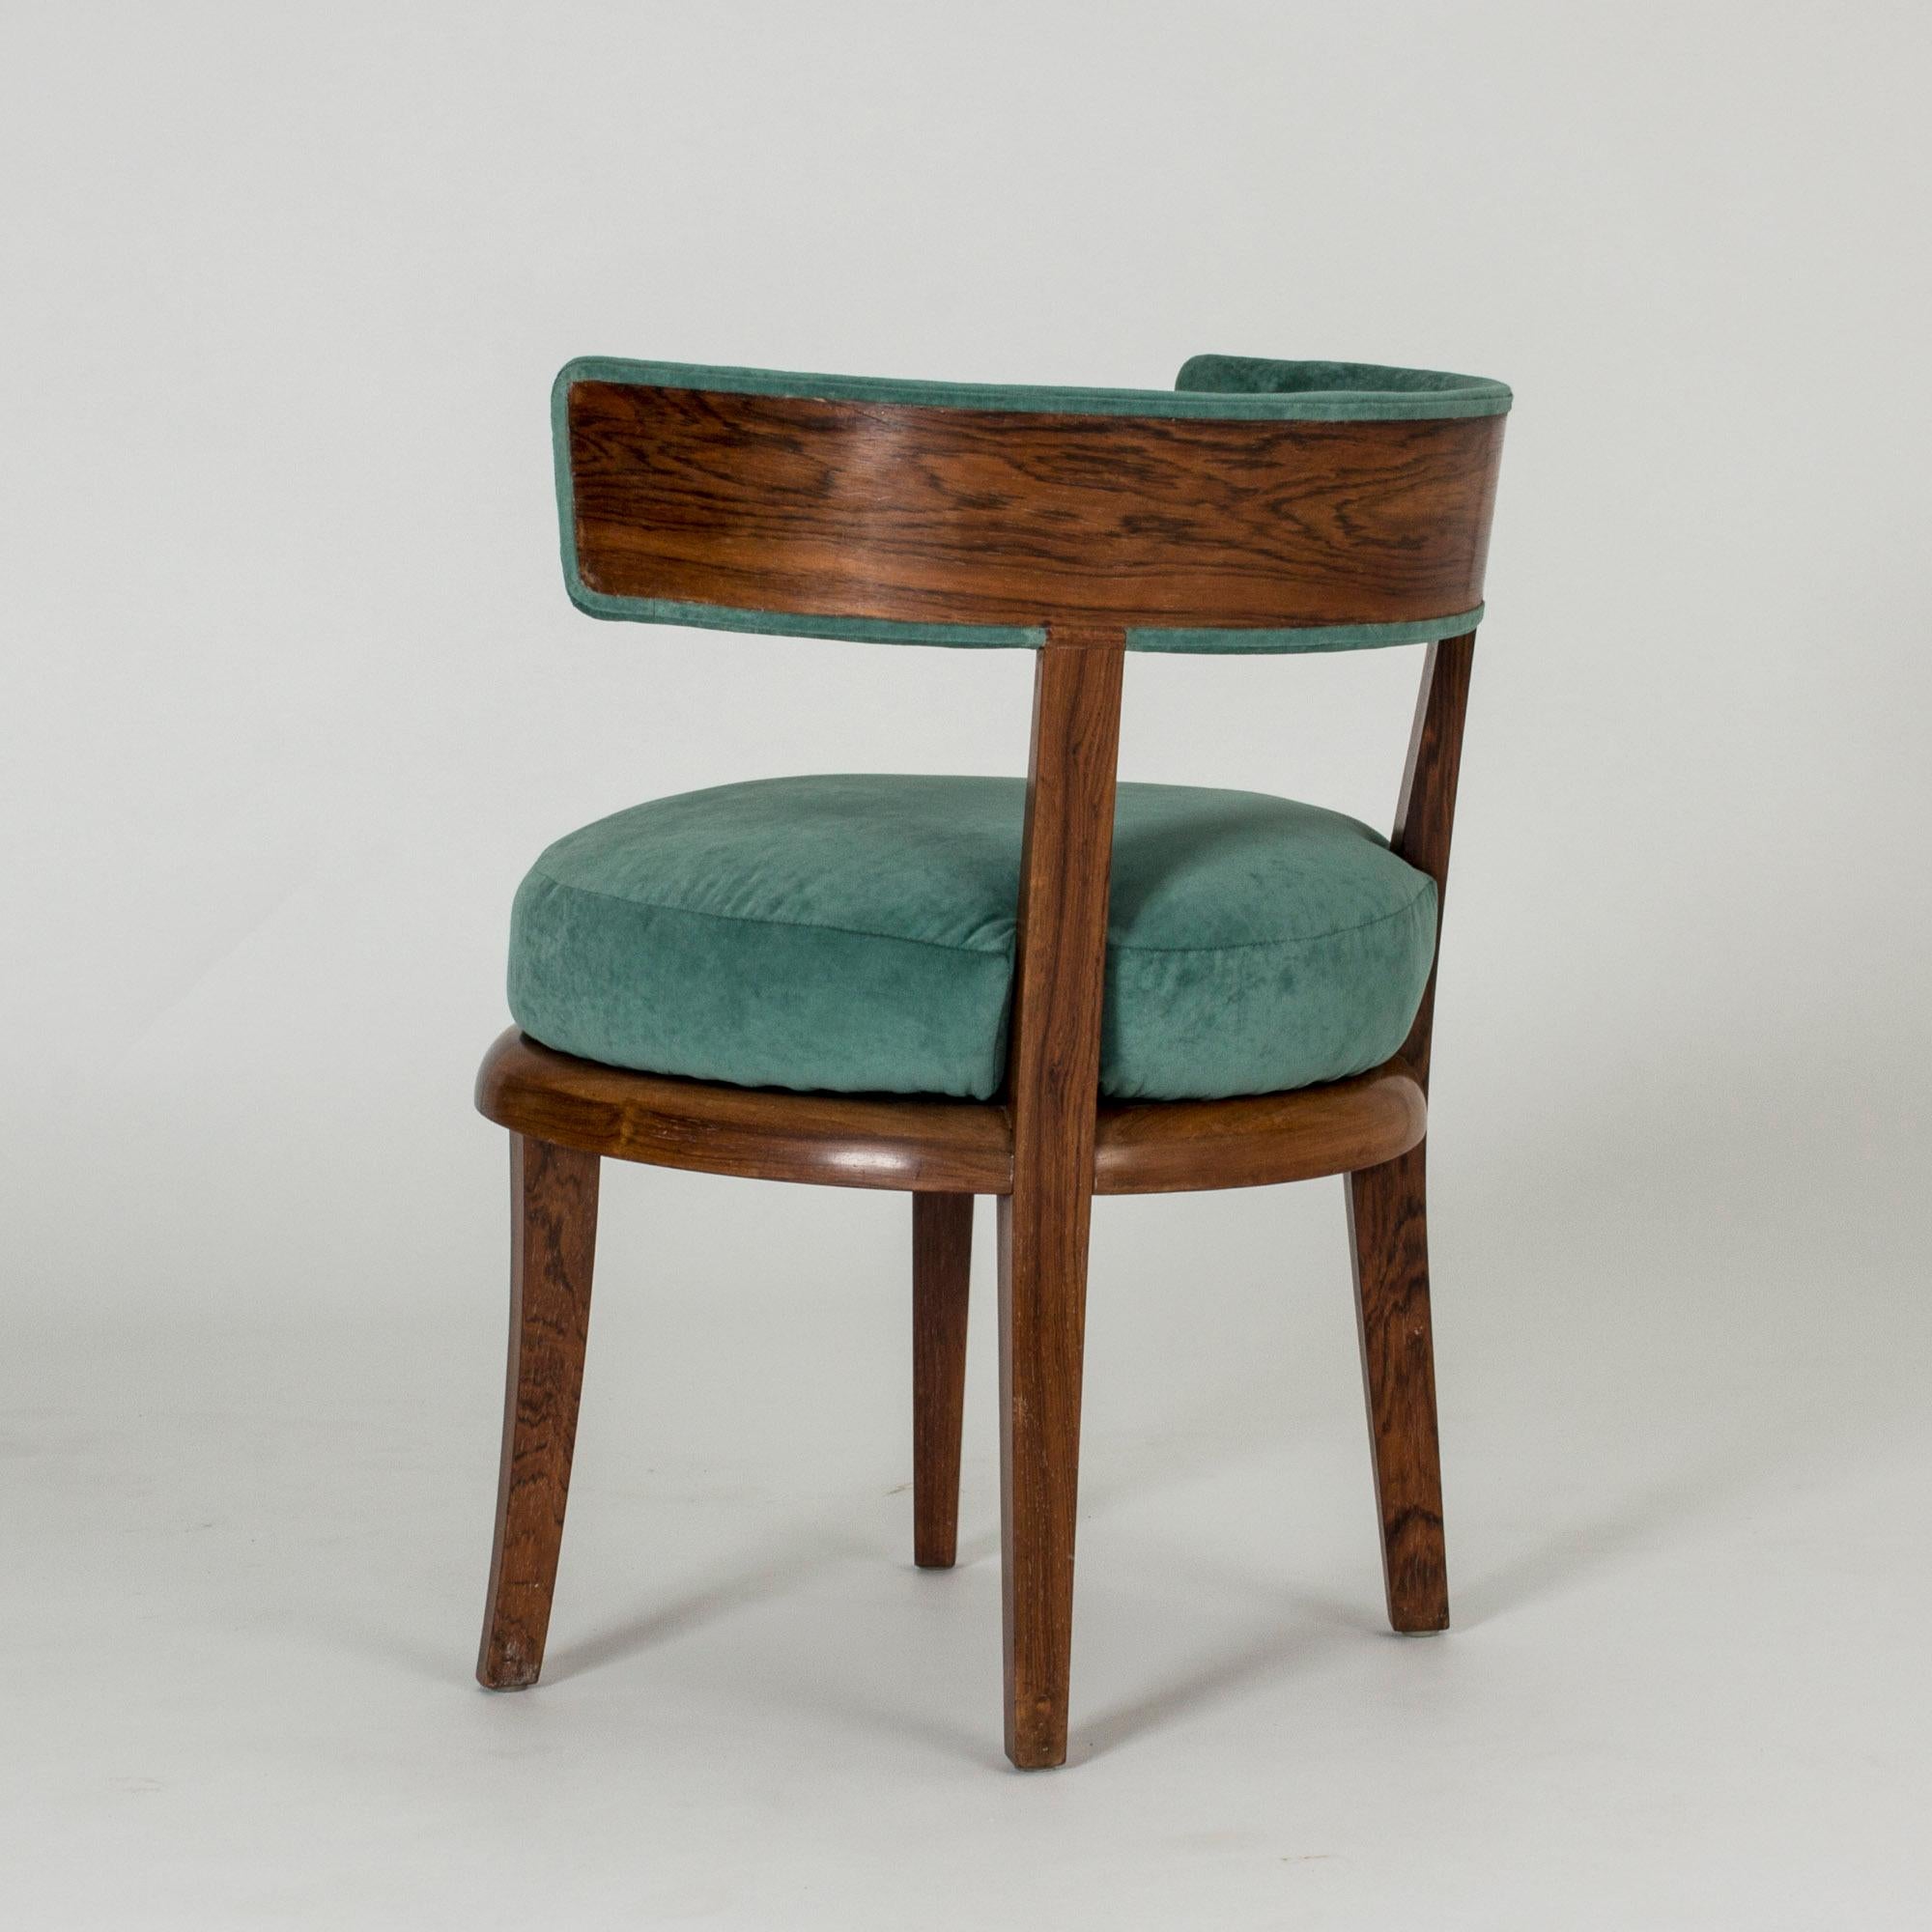 Beautiful rosewood chair by Carl Hörvik, commissioned by and made for the Stockholm Exhibition in 1930 and an outstanding example of that period’s luxurious functionalism. Velvet seat and back, newer upholstery.